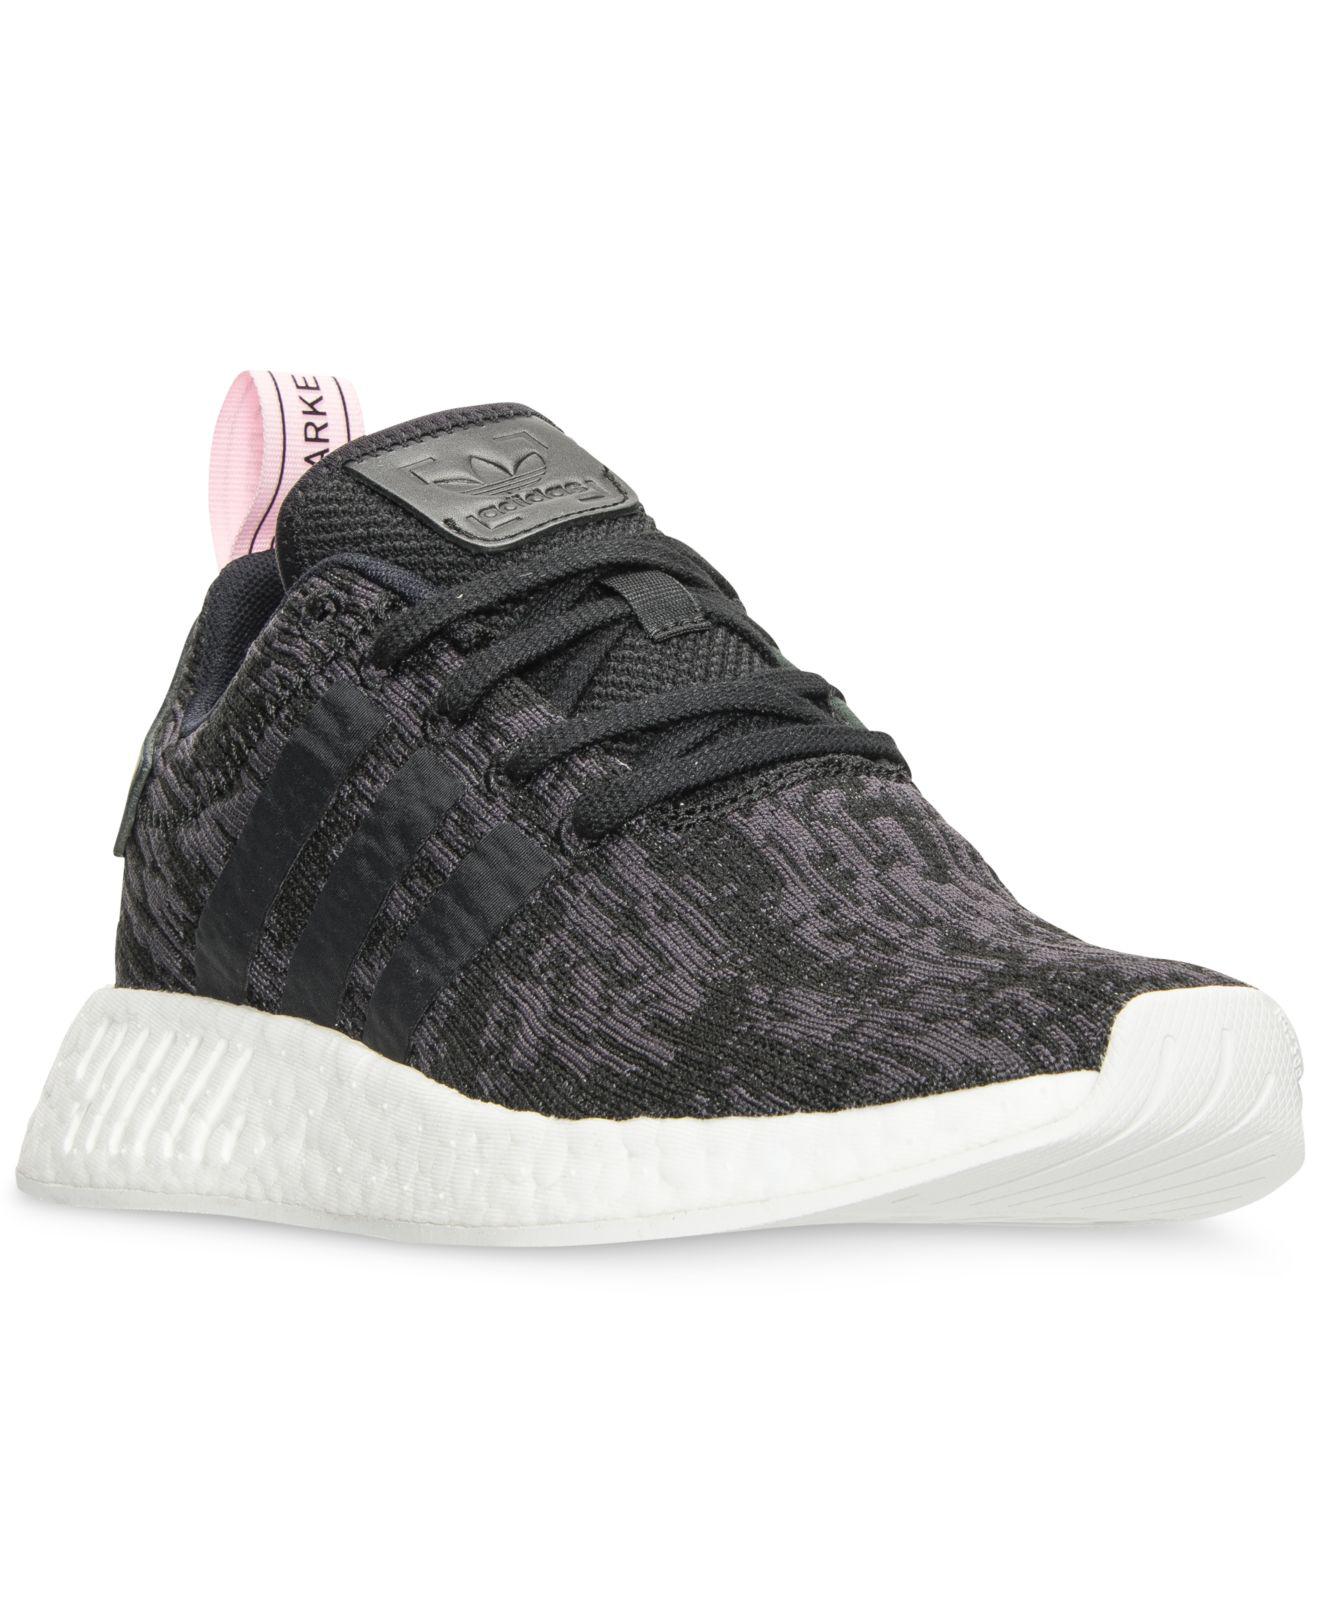 adidas women's nmd r2 casual sneakers from finish line